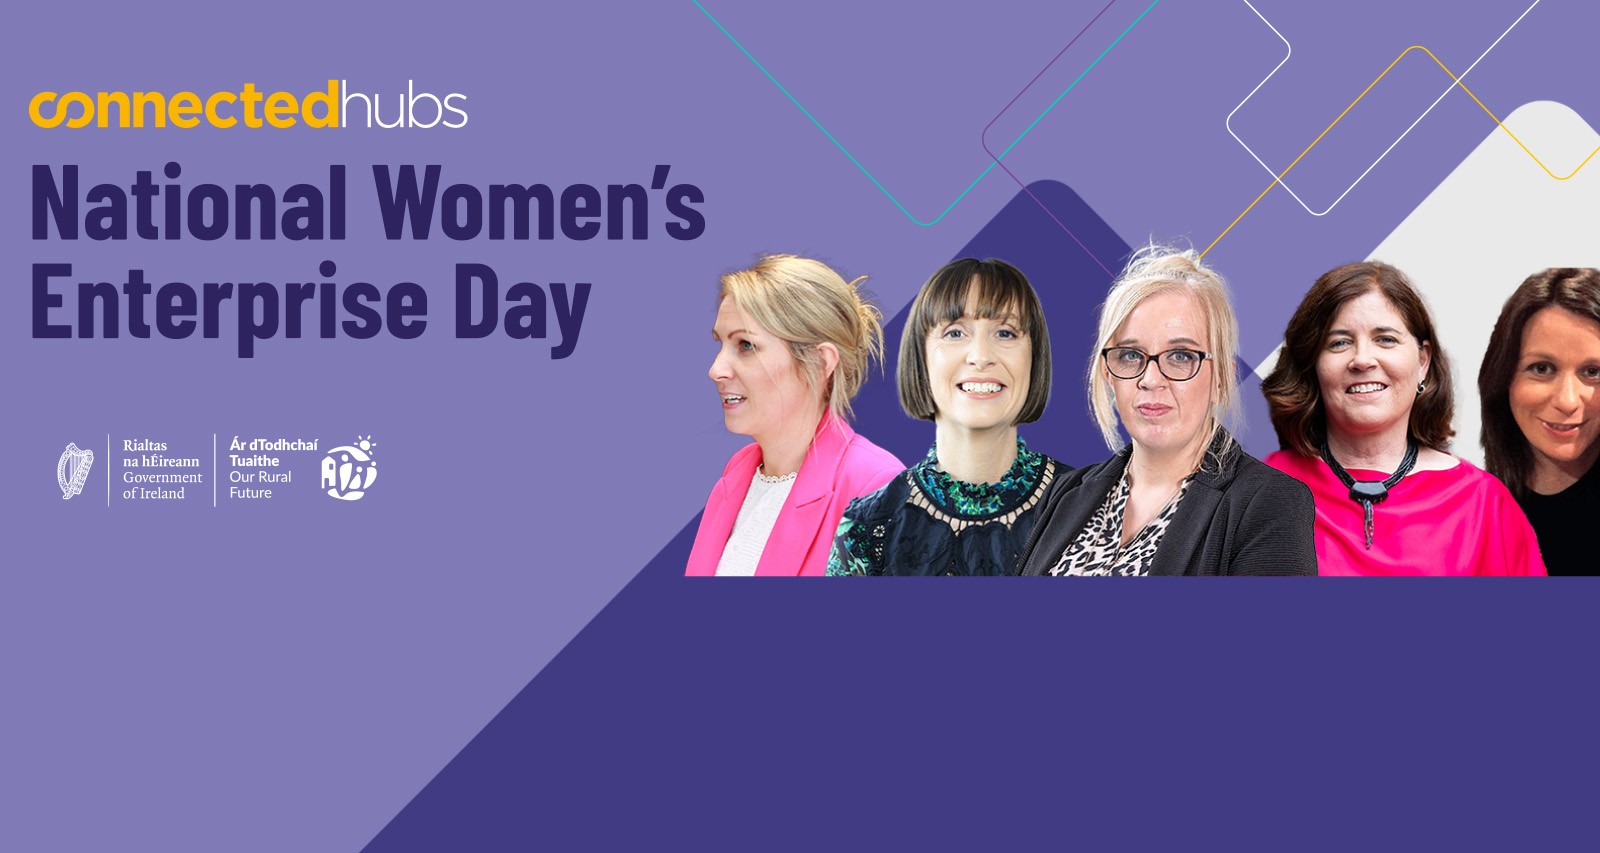 5 women leading the charge at Connected Hubs across Ireland